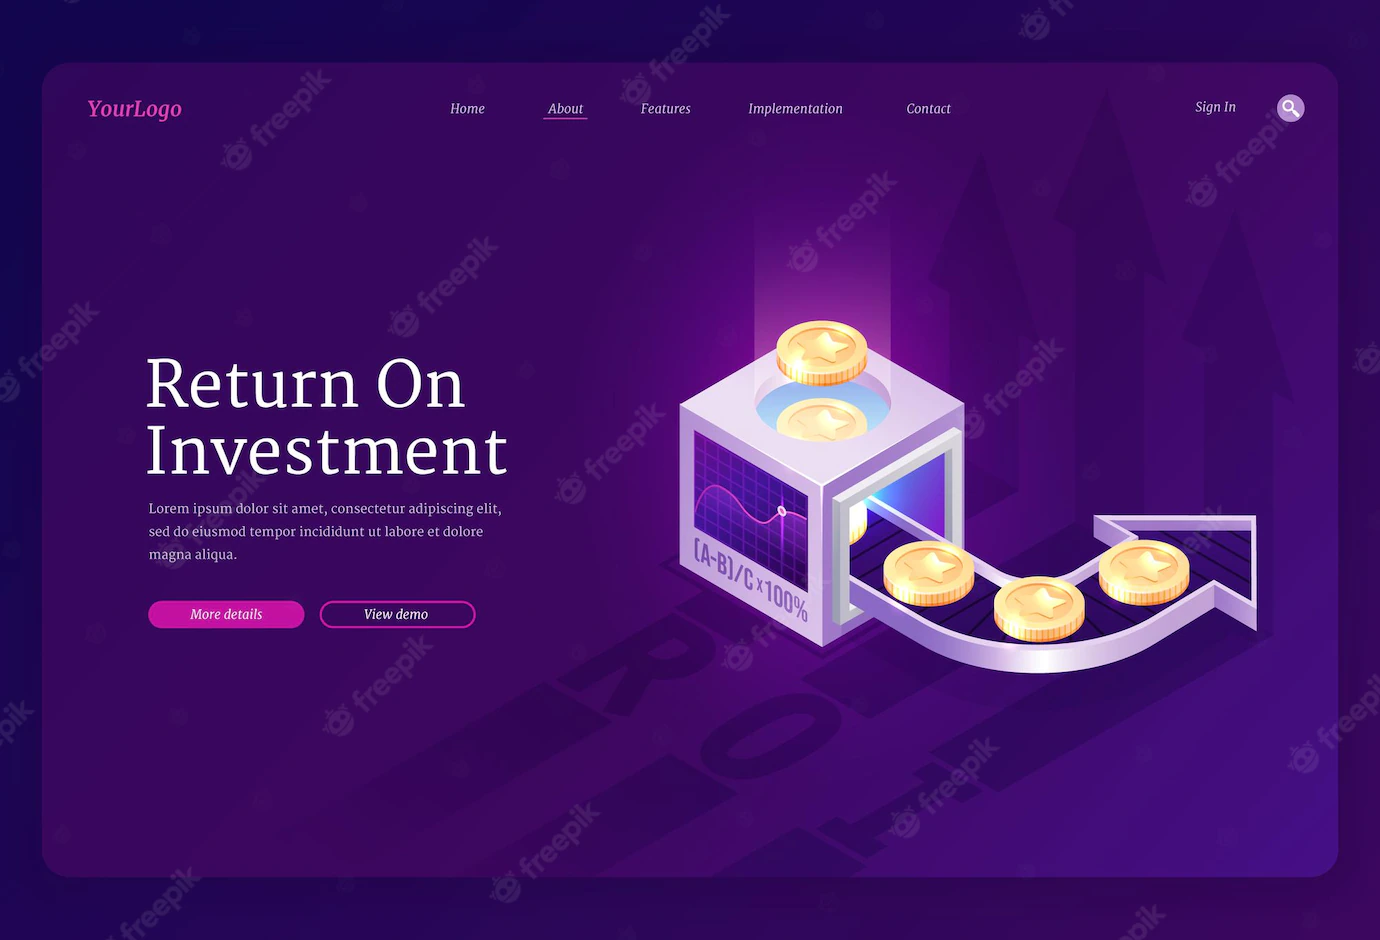 Return Investment Landing Page 107791 5300